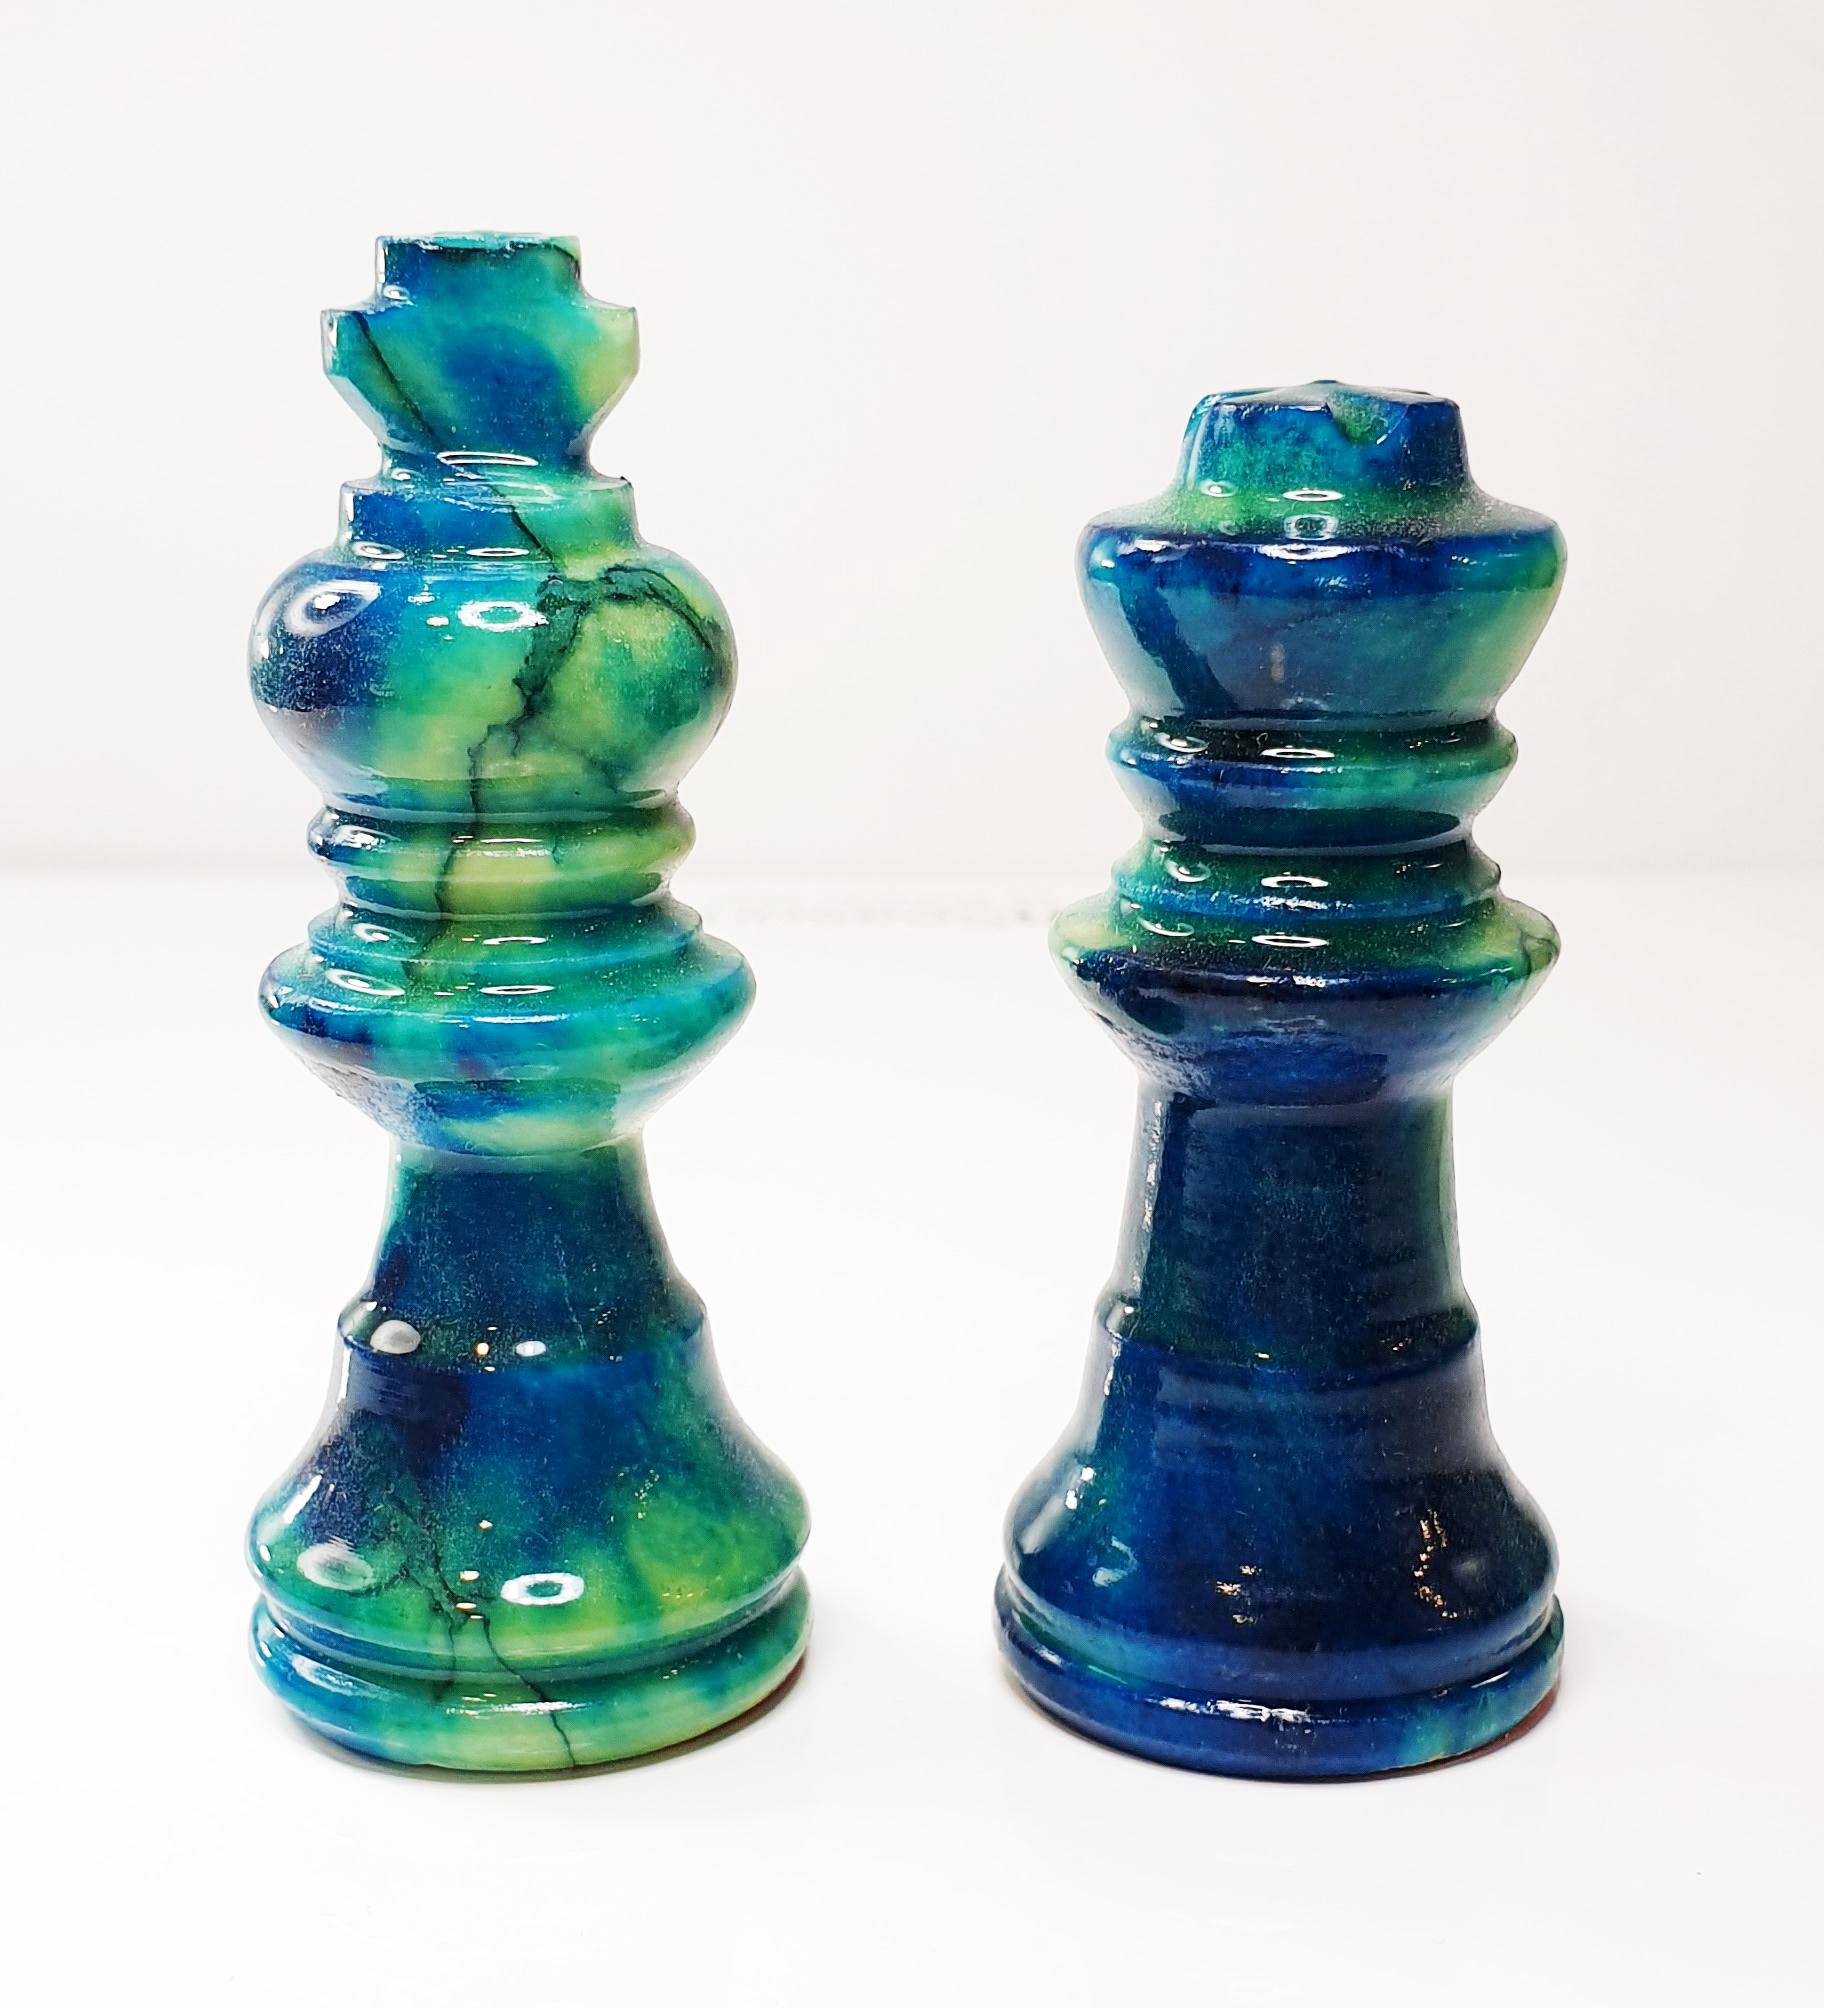 The “Chiellini” company is famous in all the world for it’s production of chess boards, chess made in Alabaster Stone. The translucent quality and the many colors that can be achieved from this special stone, alabaster, lend perfectly to create some